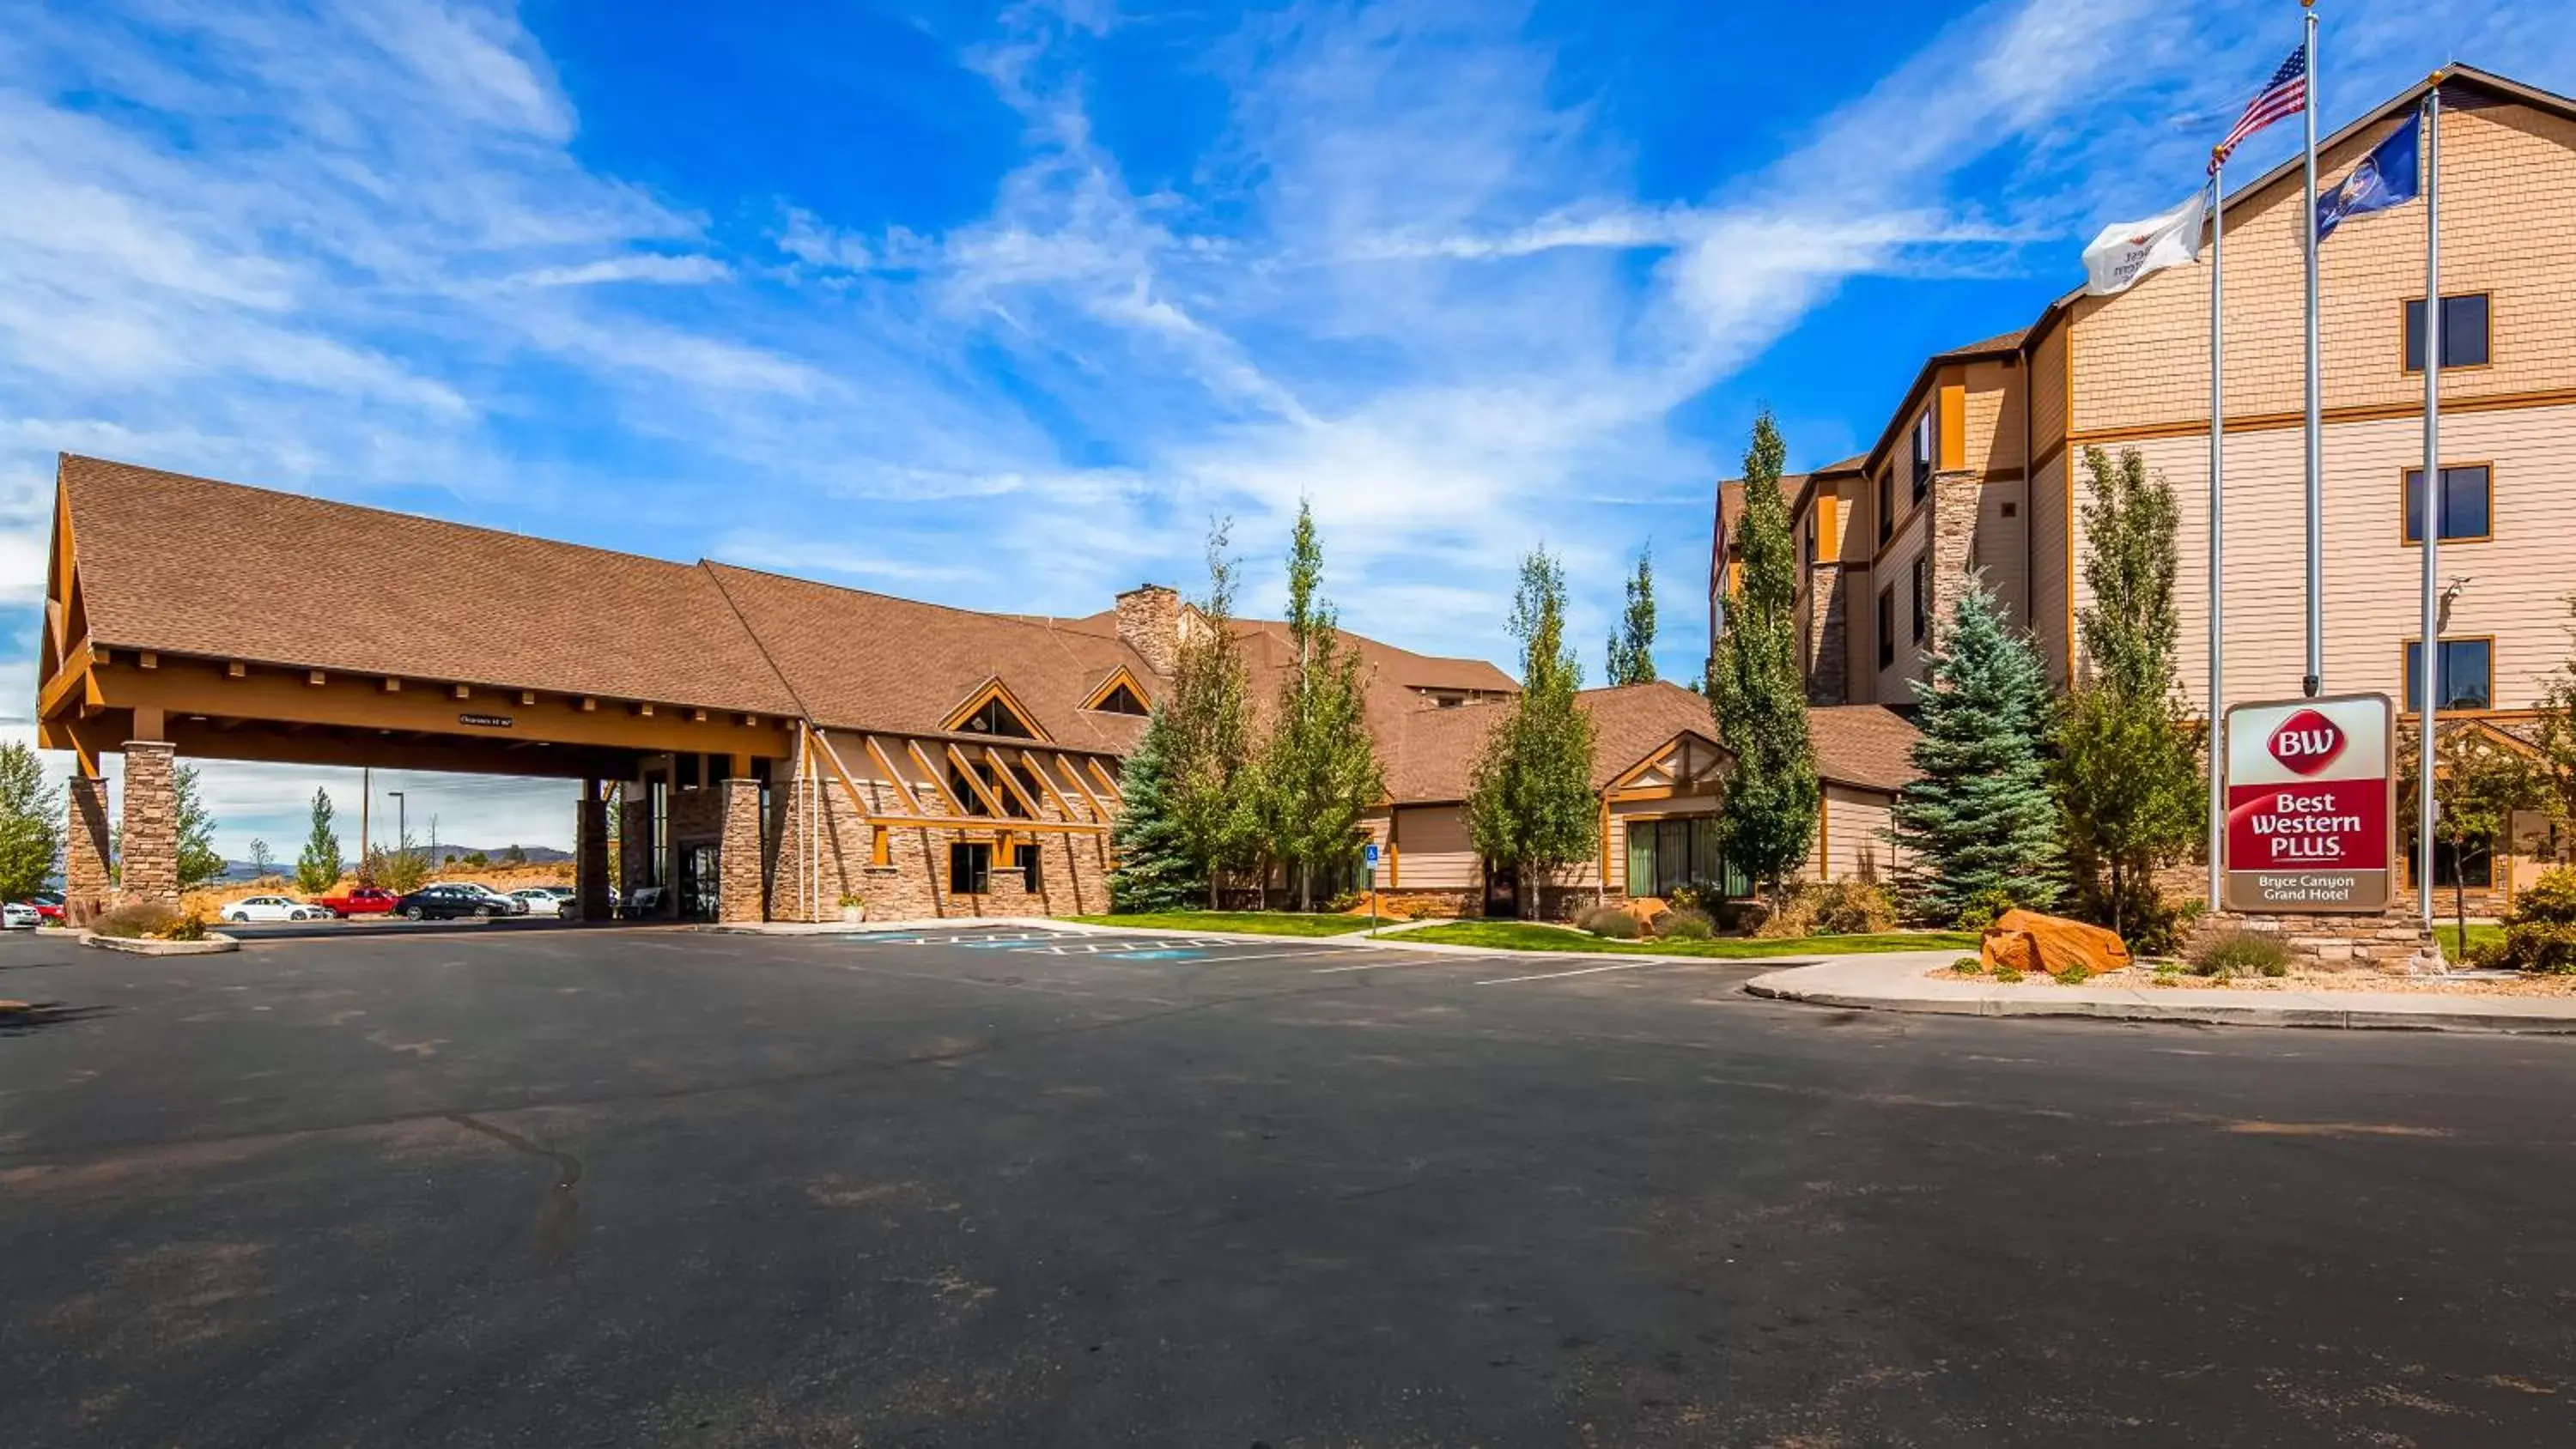 Property Building in Best Western PLUS Bryce Canyon Grand Hotel